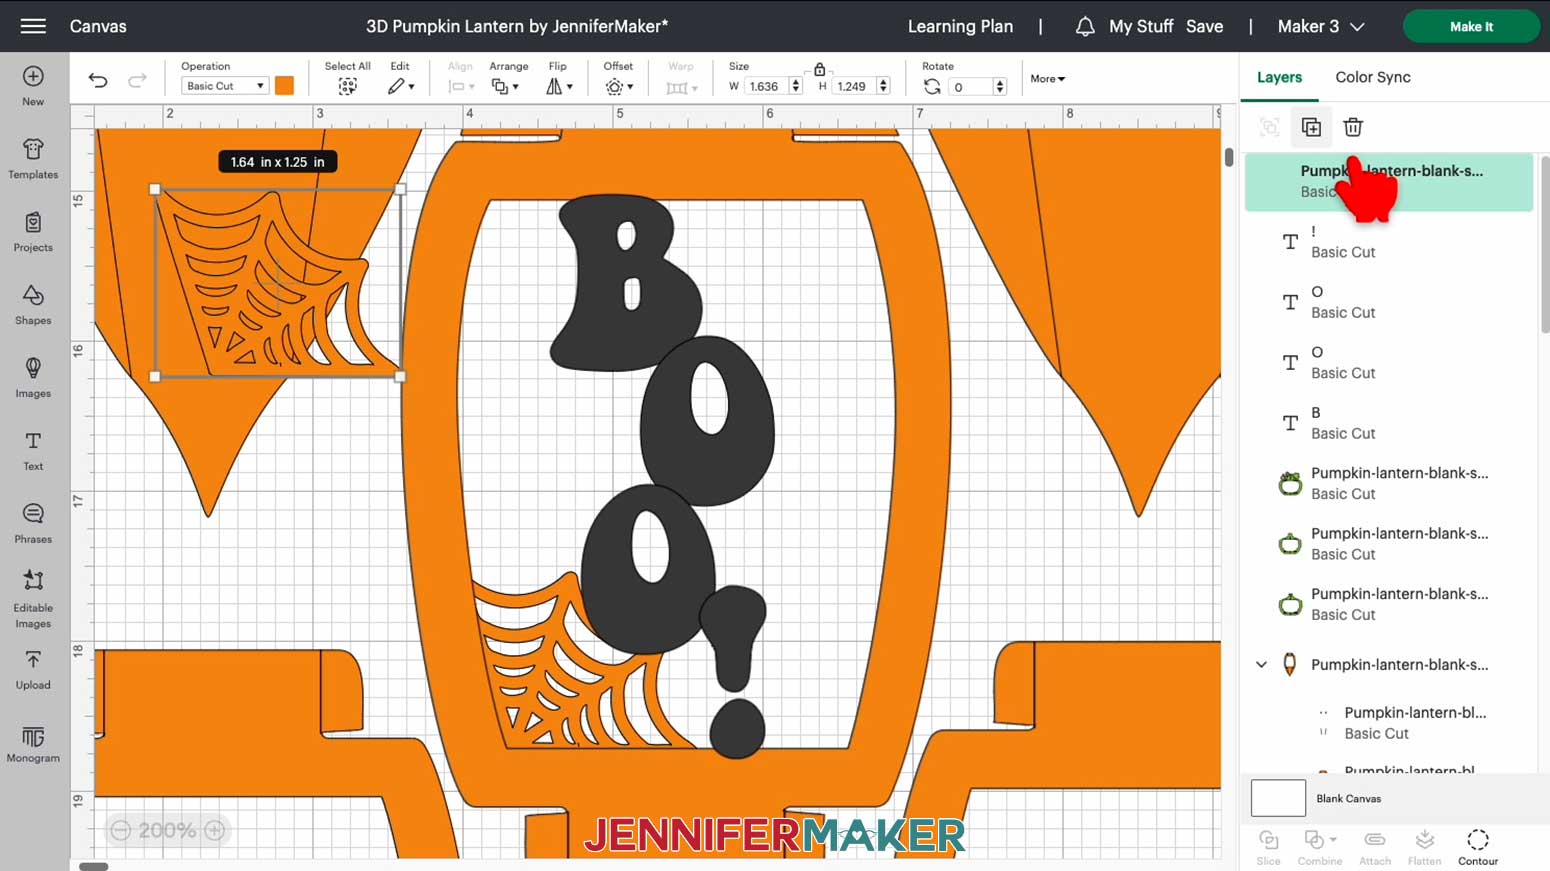 Click the duplicate button in Cricut Design Space to make a copy of the spiderweb layer for the customized 3D pumpkin lantern panel